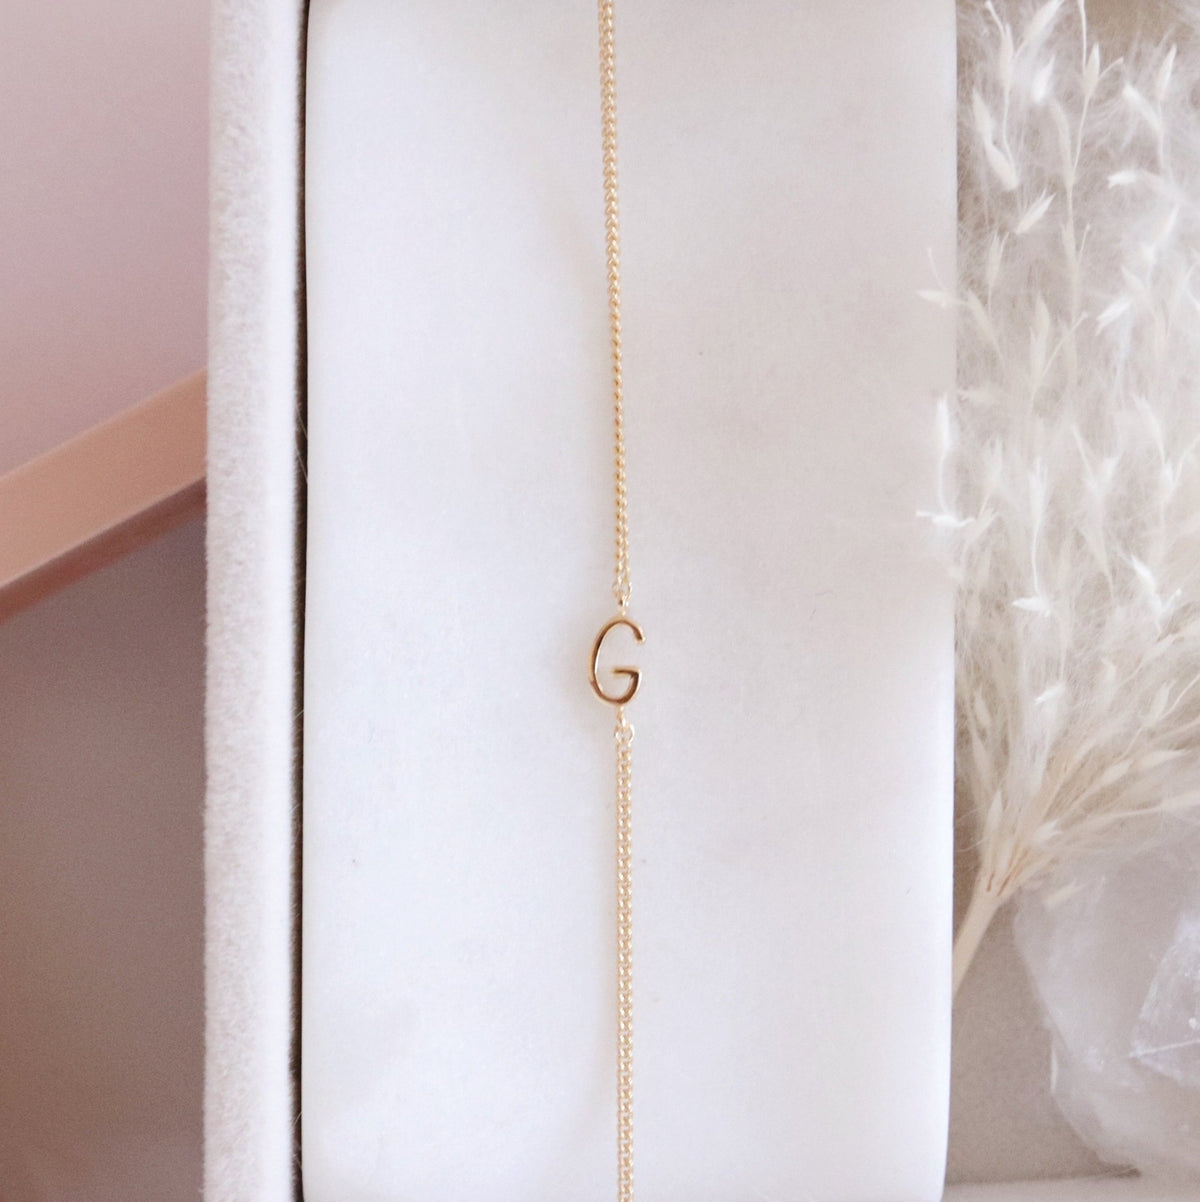 NOTABLE OFFSET INITIAL NECKLACE - G - GOLD - SO PRETTY CARA COTTER